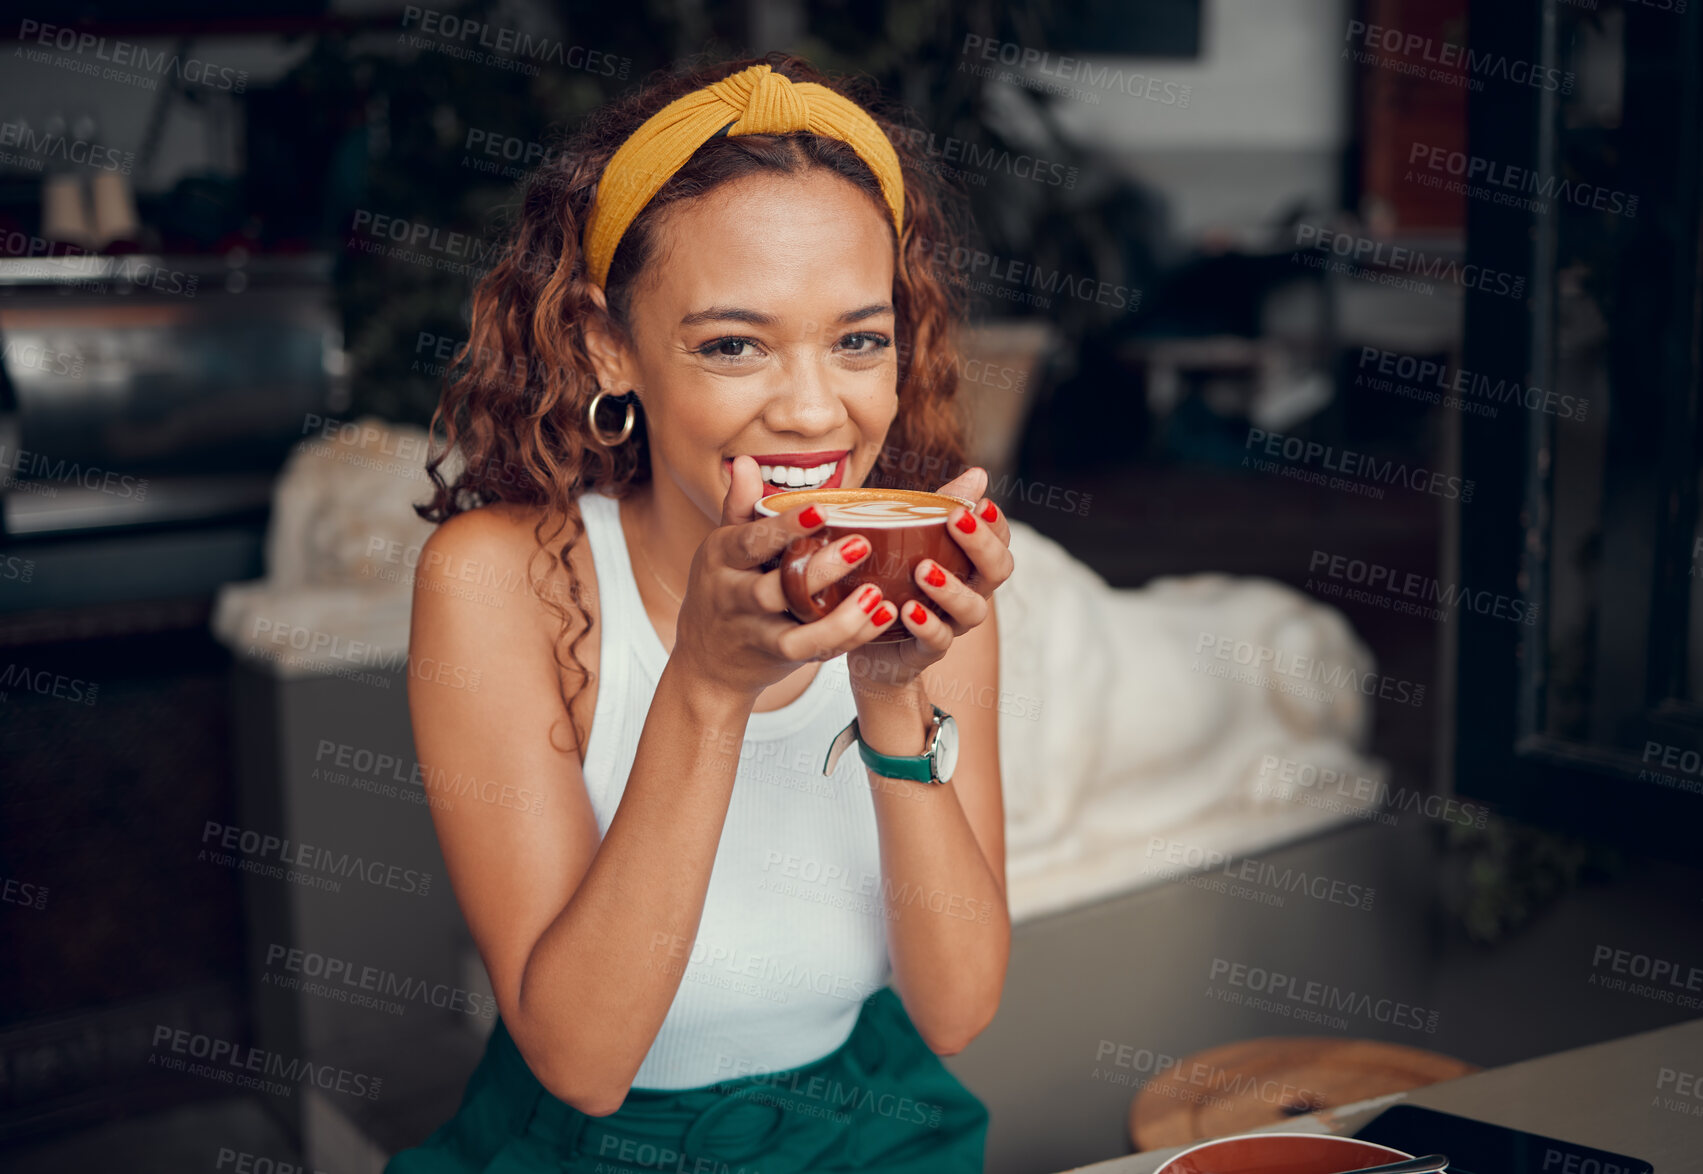 Buy stock photo Smile, happy and coffee shop young woman enjoying a cup of tea in a restaurant or cafe on her lunch break. Portrait of happy customer drinking her morning caffeine or cappuccino with happiness